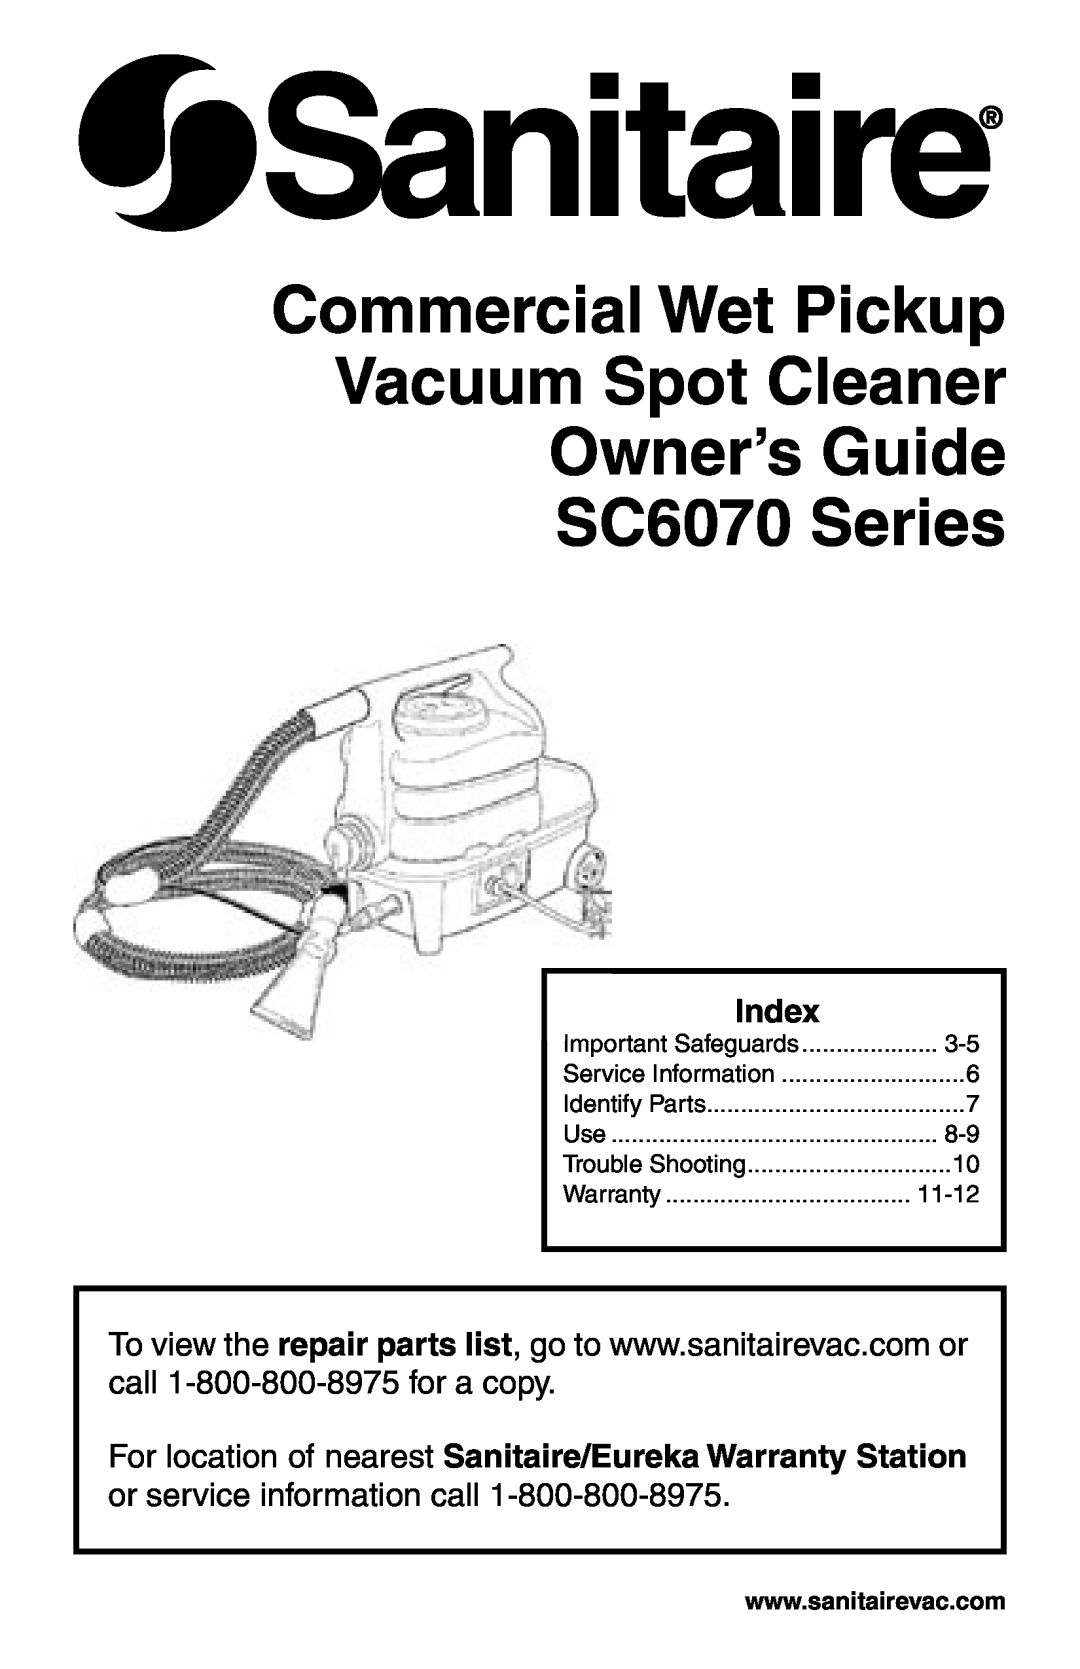 Sanitaire warranty Index, Commercial Wet Pickup Vacuum Spot Cleaner, Owner’s Guide SC6070 Series, Service Information 